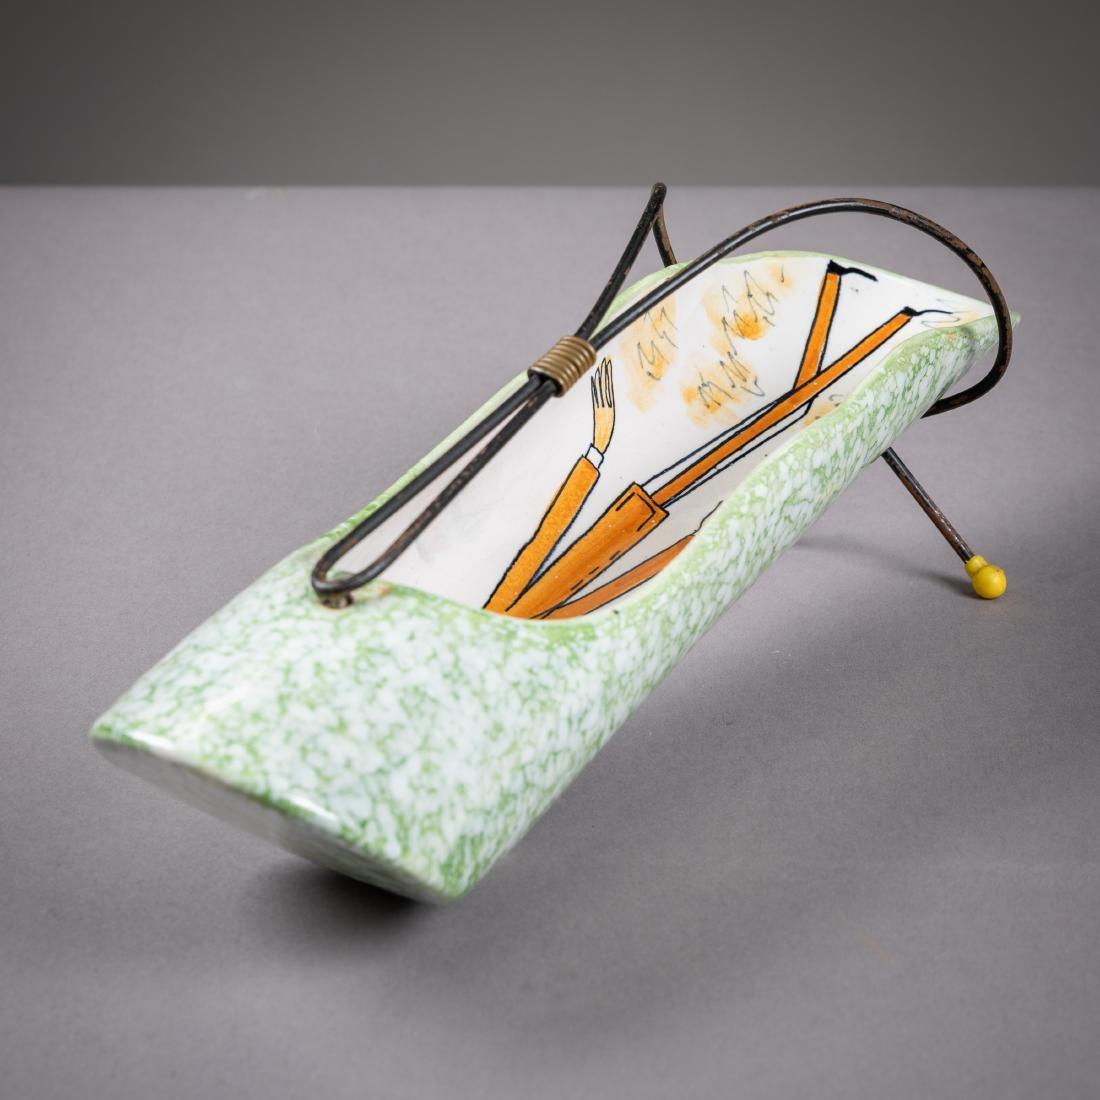 Rometti Italy midcentury porcelain breadstick holster server platter. Hand painted figurative scene in orange and cream inside, green marbled exterior, swooping metal handle with yellow dot feet. Scale of figures and handle relative to central